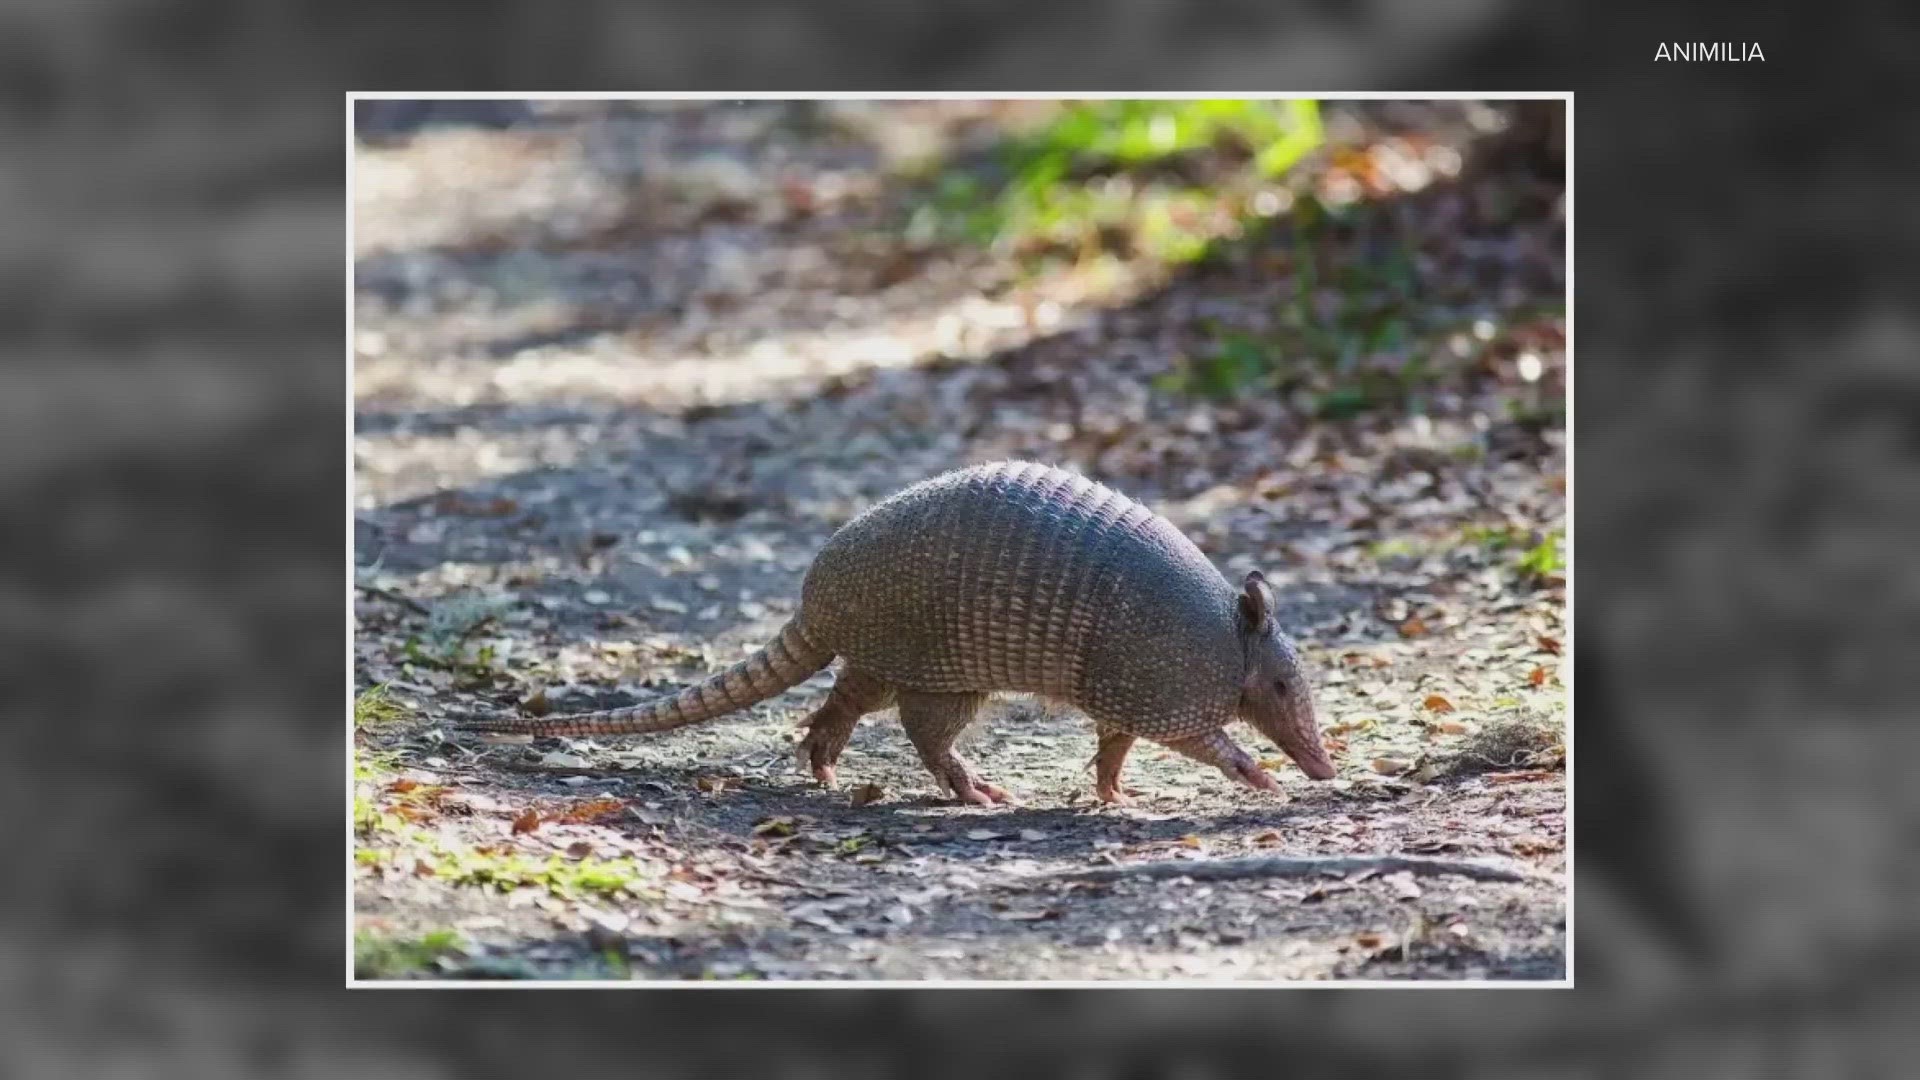 The nine-banded armadillo became the 51st mammal found at the forest in Bullitt County.